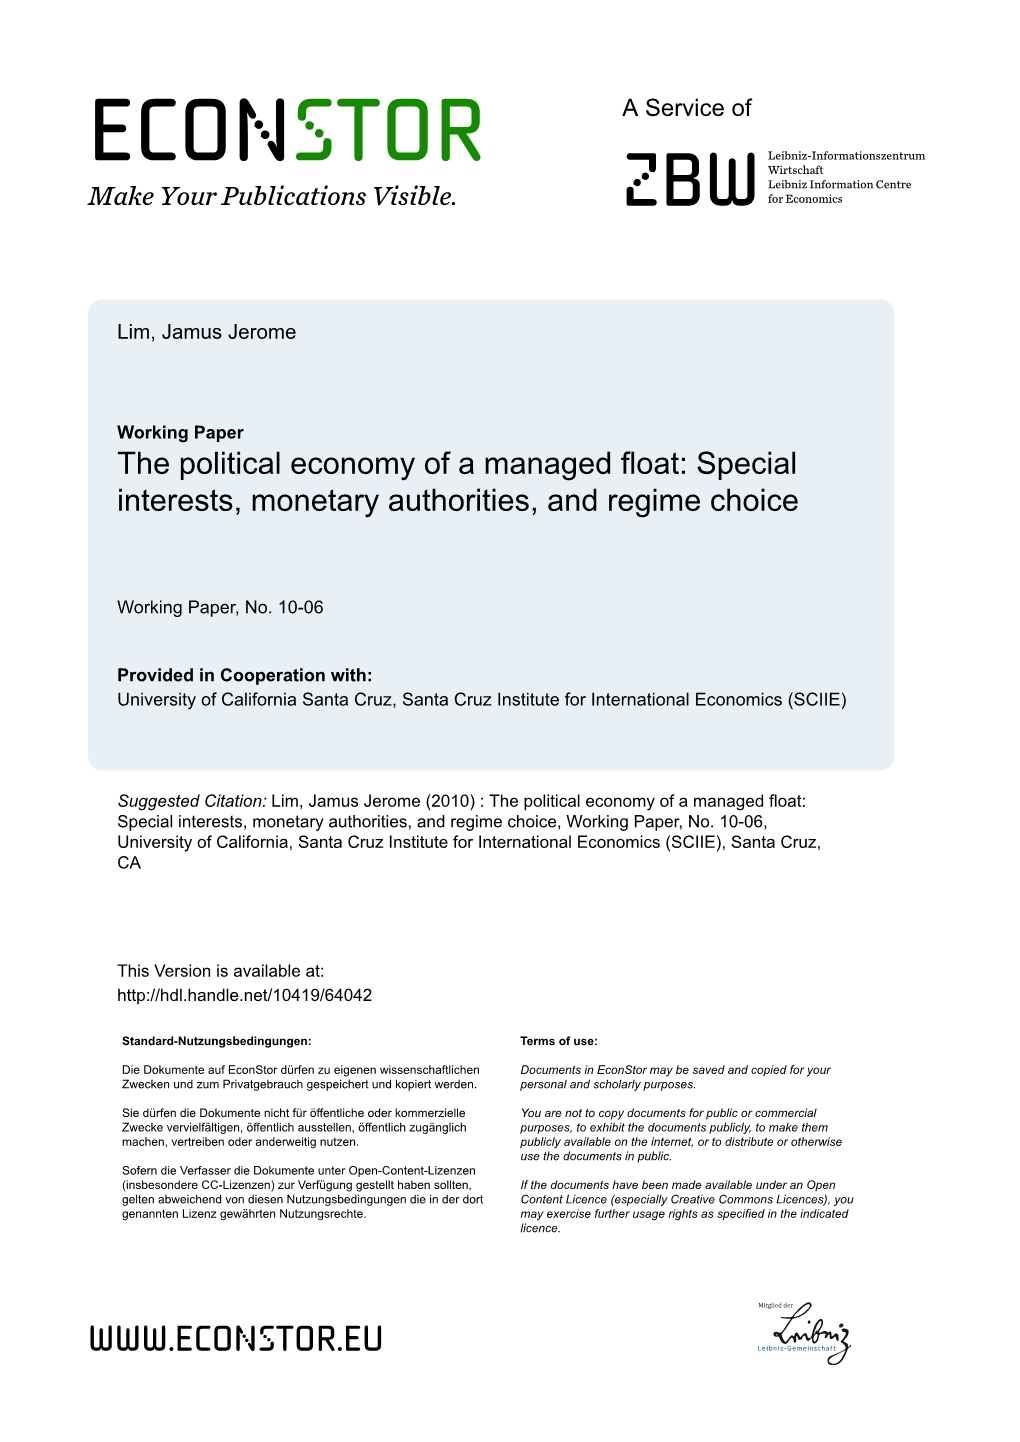 The Political Economy of a Managed Float: Special Interests, Monetary Authorities, and Regime Choice